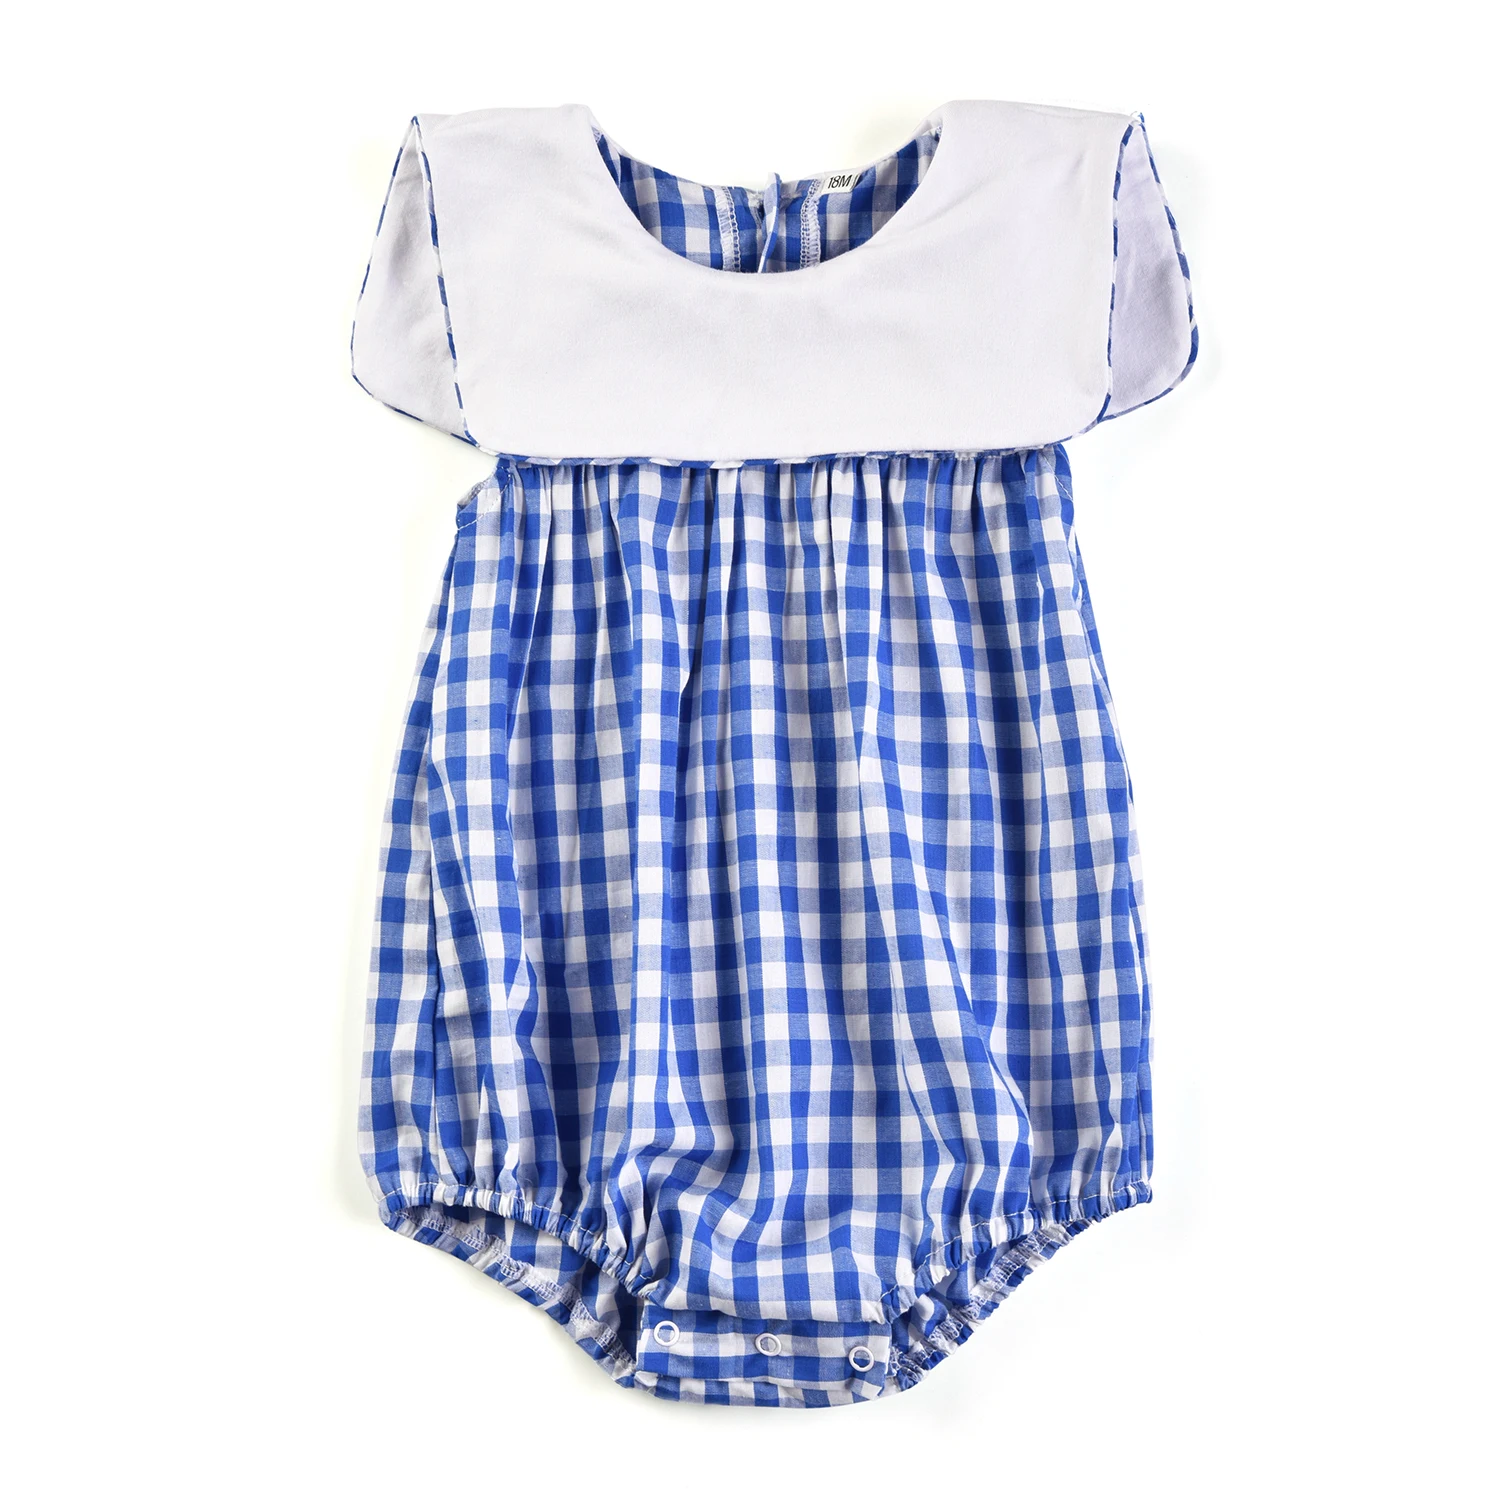 Bib Romper Baby Outfit Infant Baby Boy Bubble Romper Woven Gingham